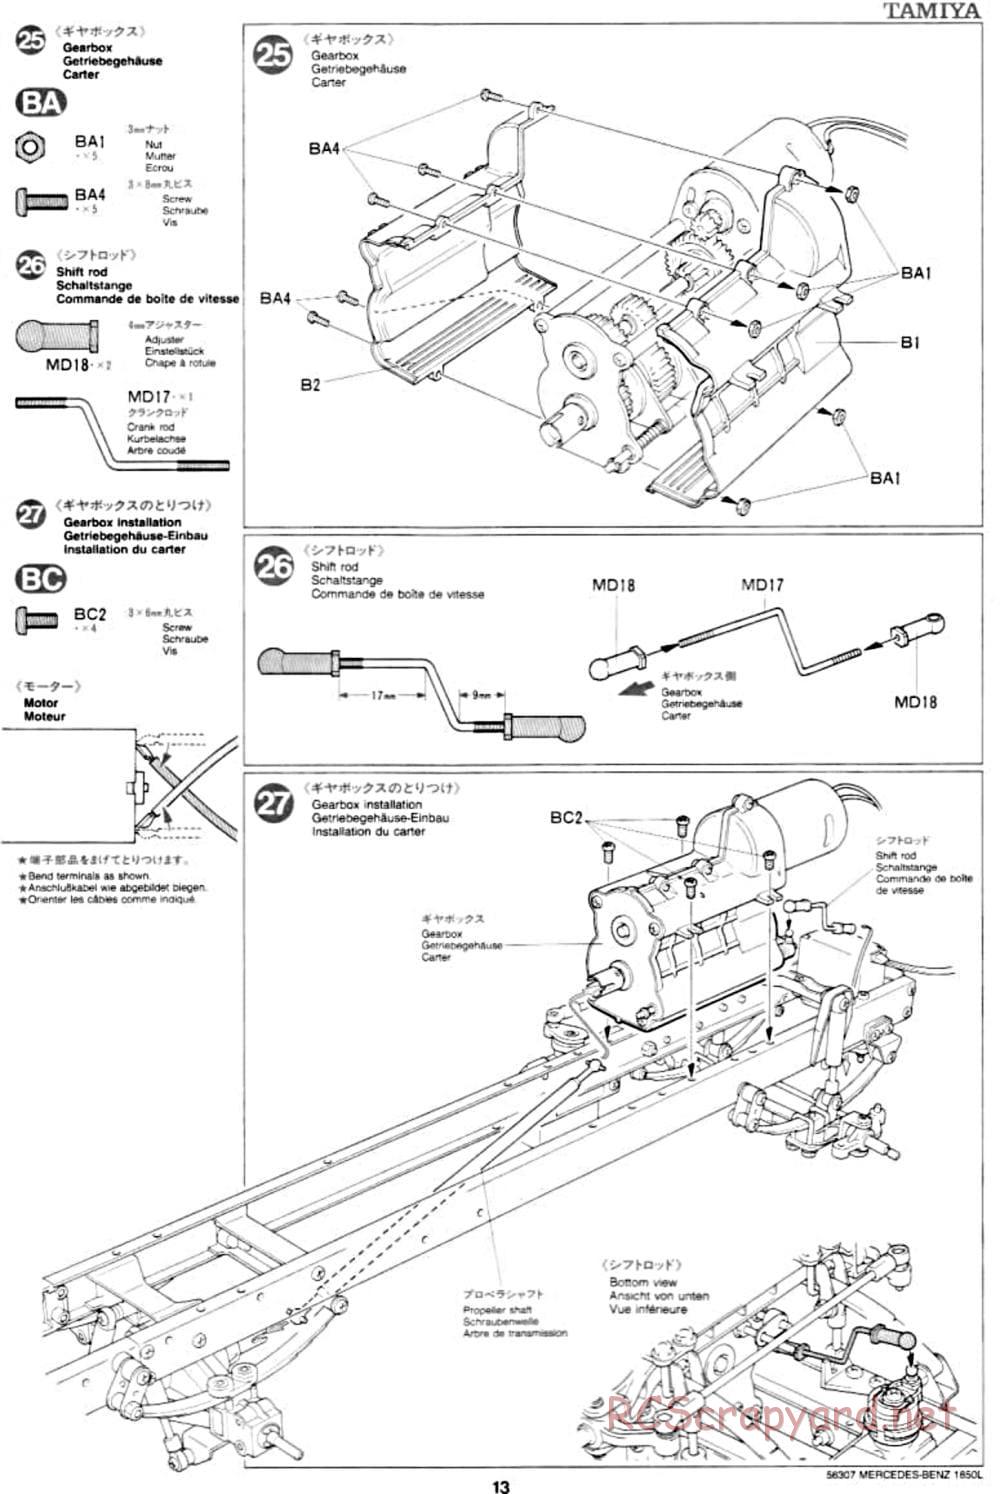 Tamiya - Mercedes-Benz 1850L Delivery Truck - Manual - Page 13